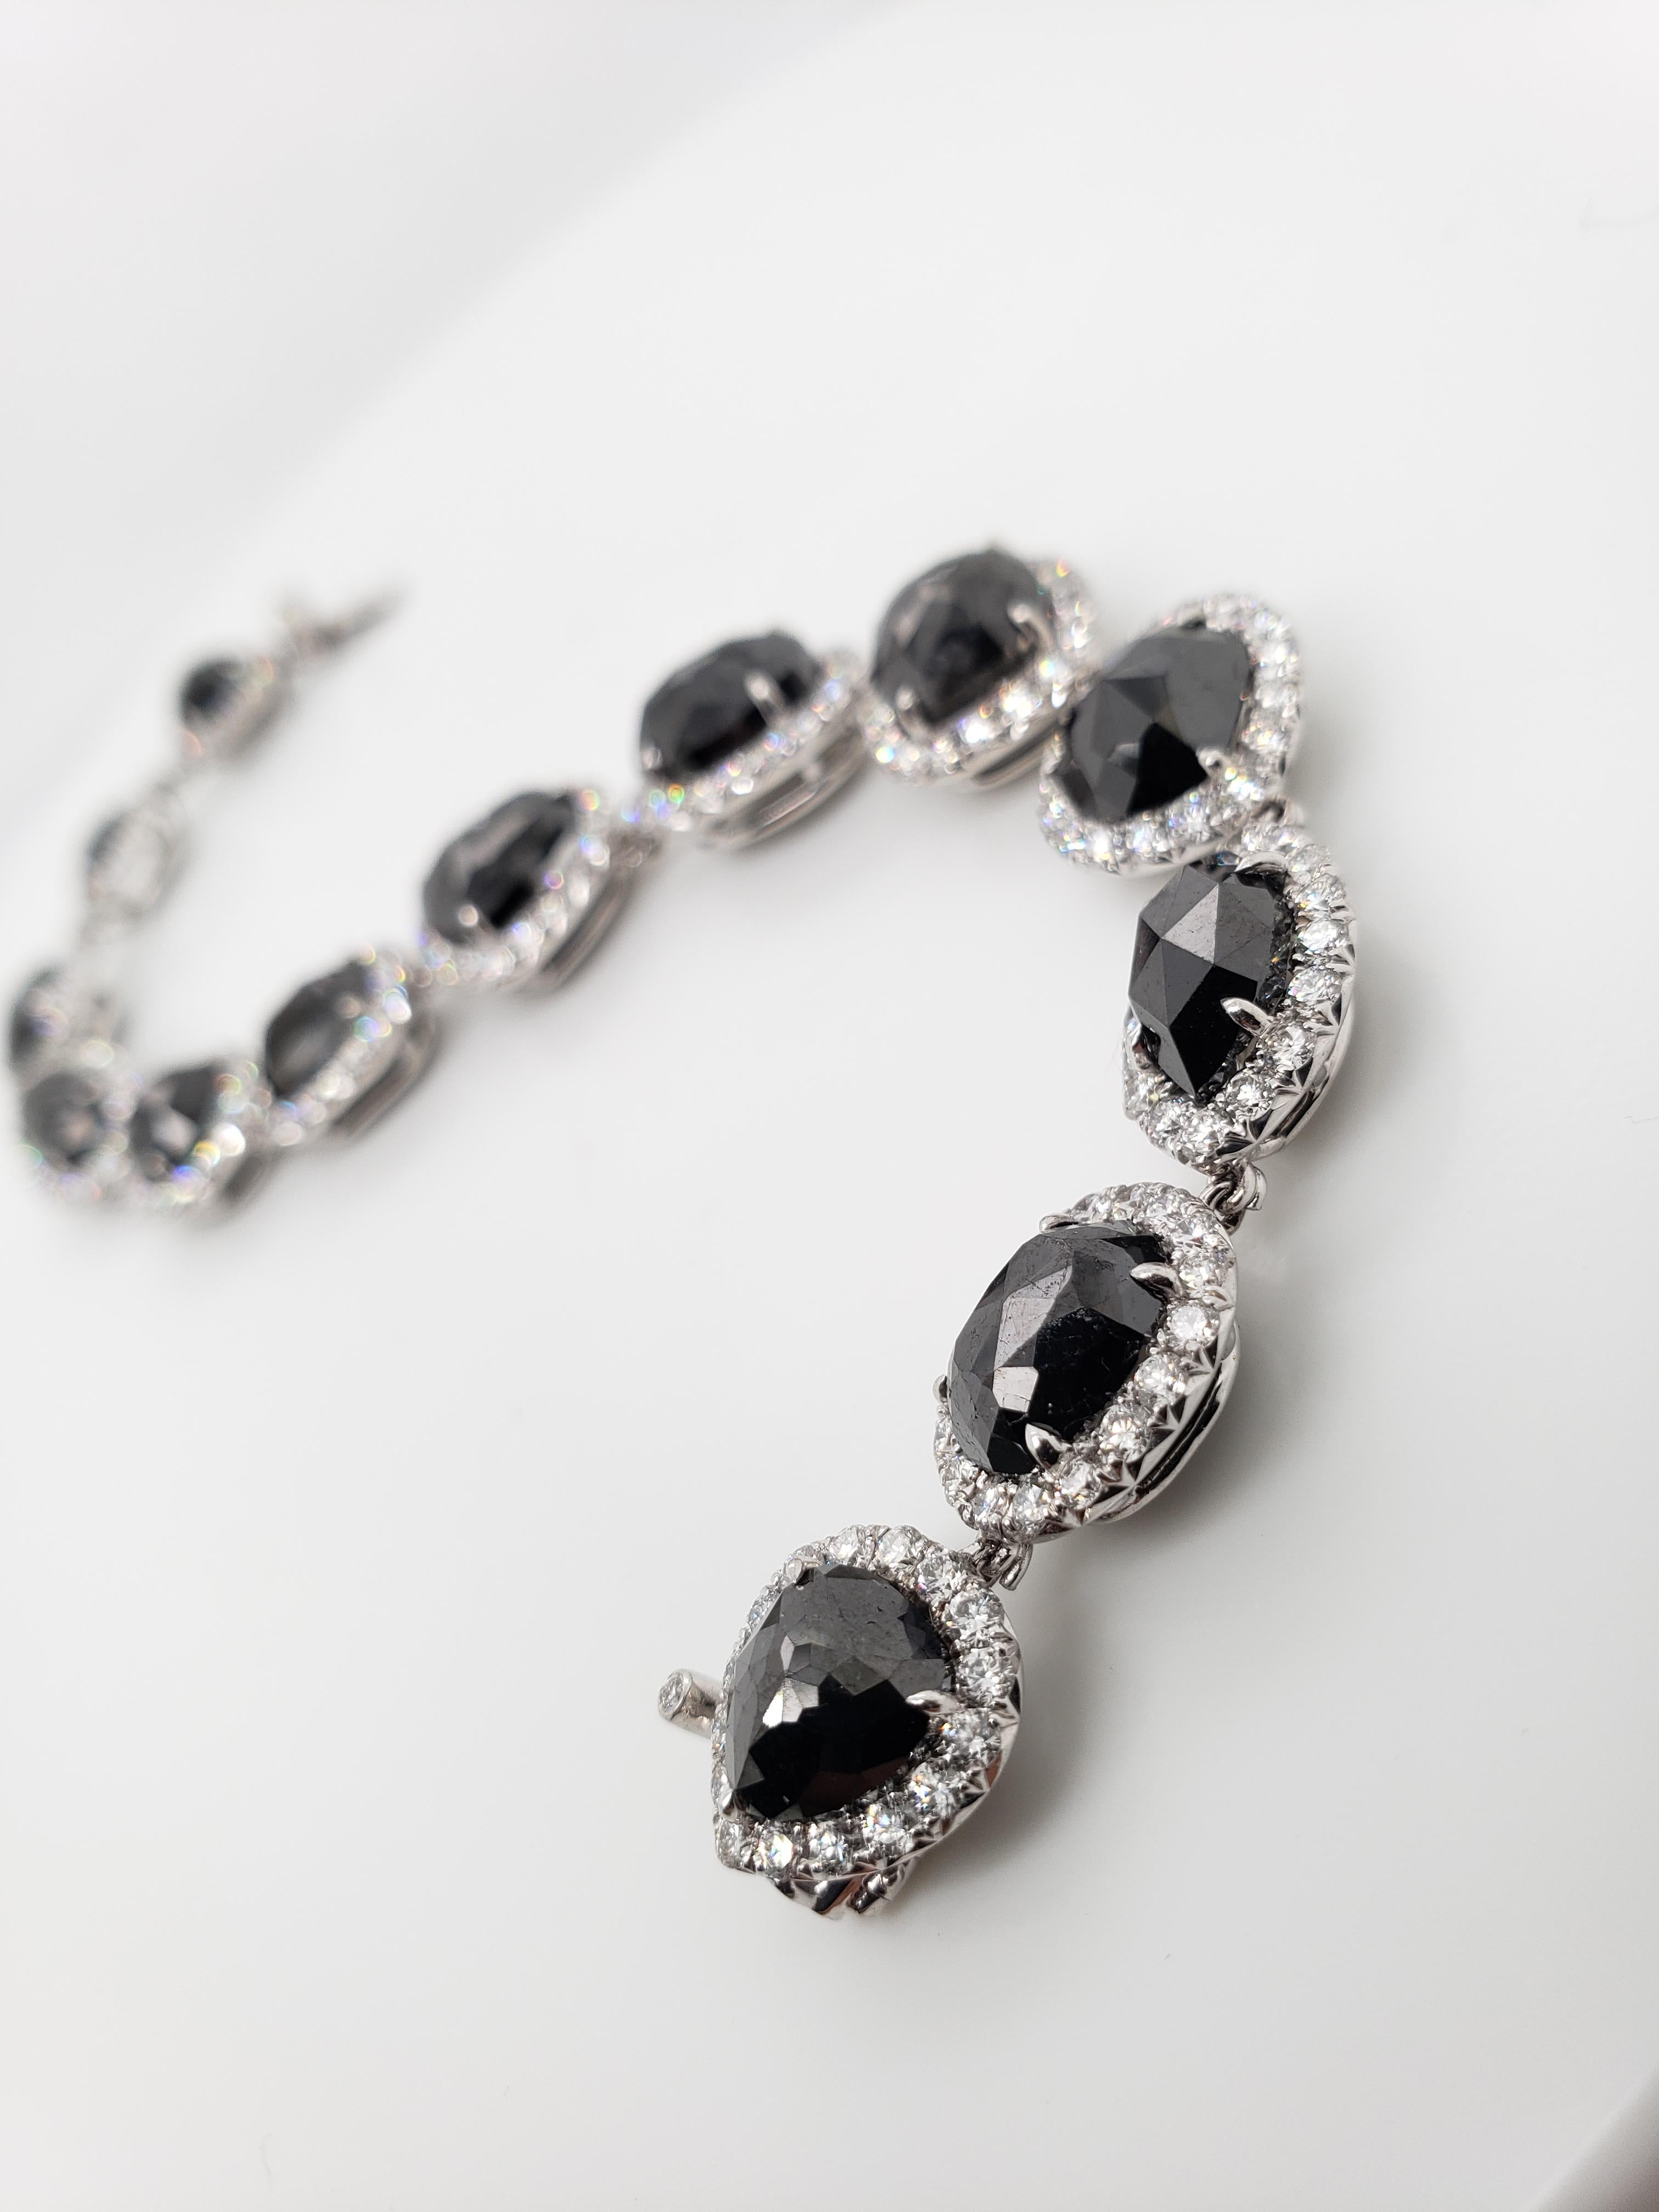 This unique straight line bracelet features 13 fathomless Rose cut Black diamonds in various shapes totaling 19.06 carats, edged in collection White pavé diamonds weighing 4.16 carats. Hand-crafted in 18K White Gold.
Clean & Chic; Fall into the